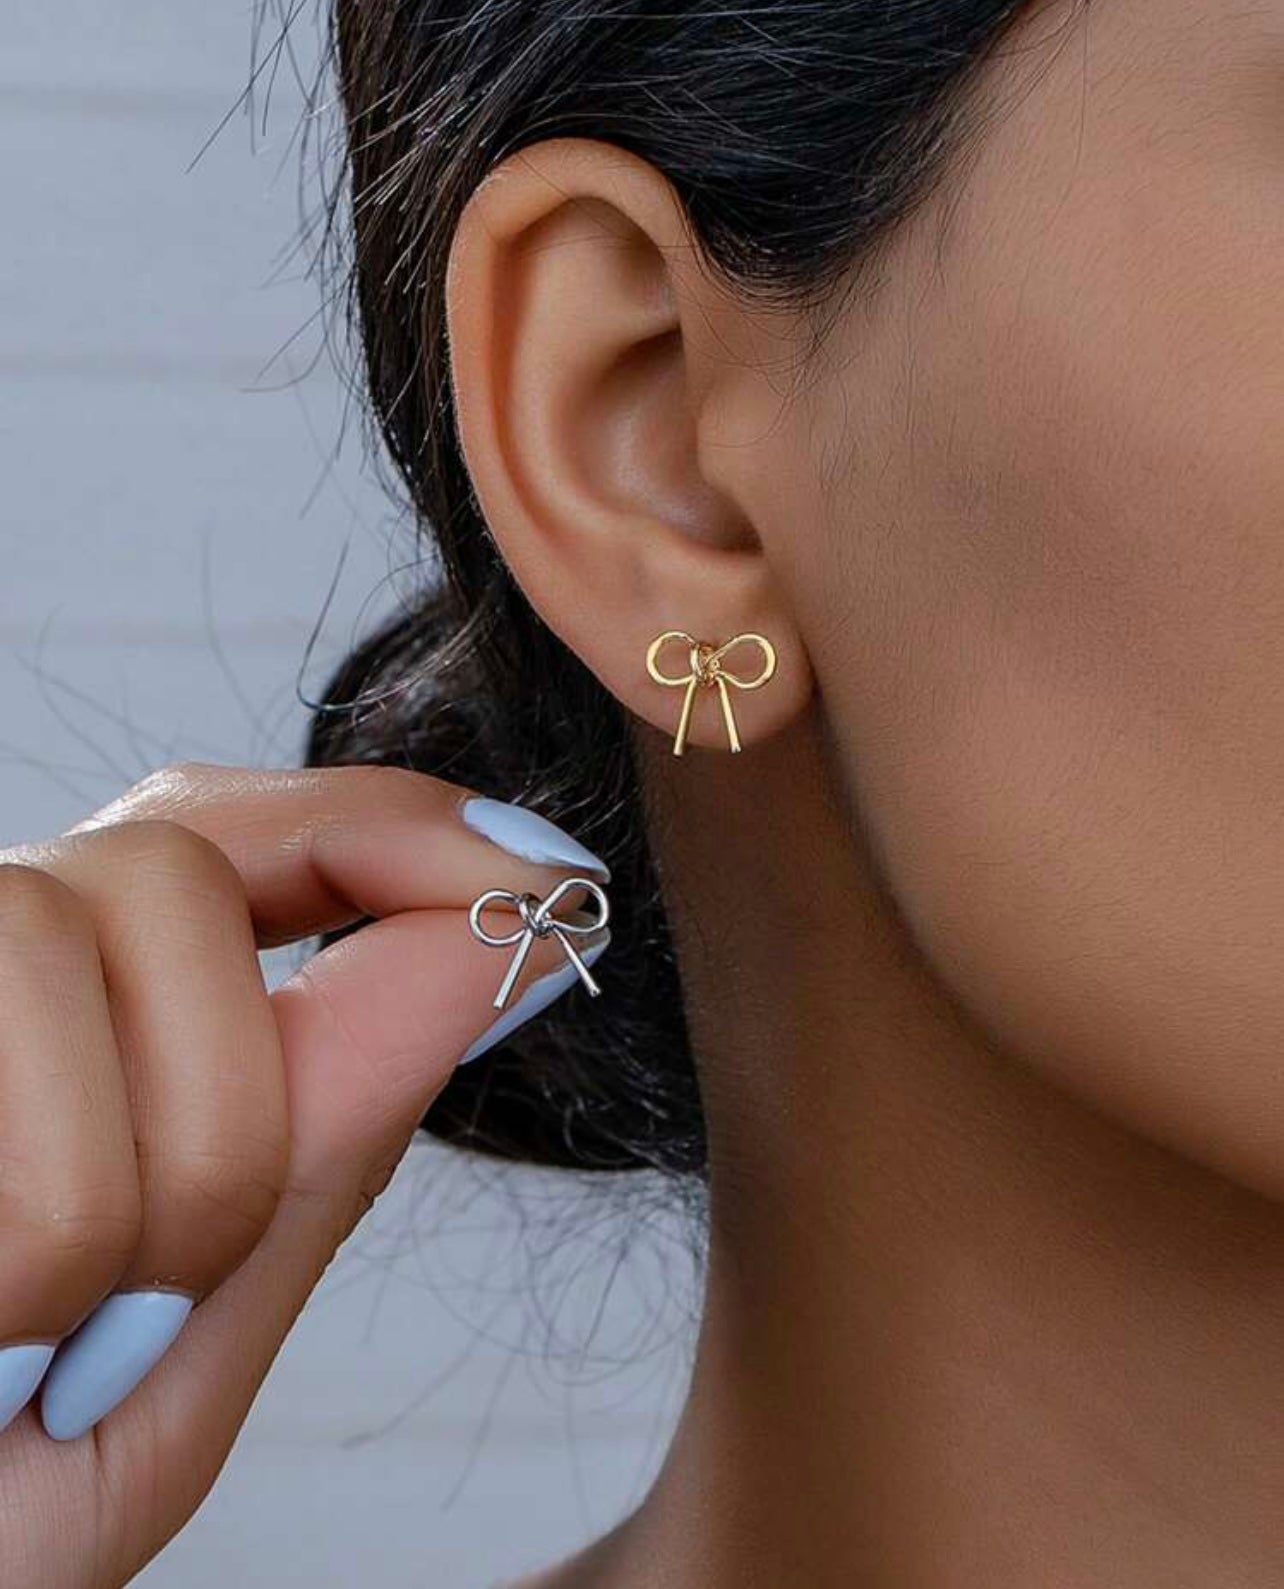 Adorable Gold Bow Earrings